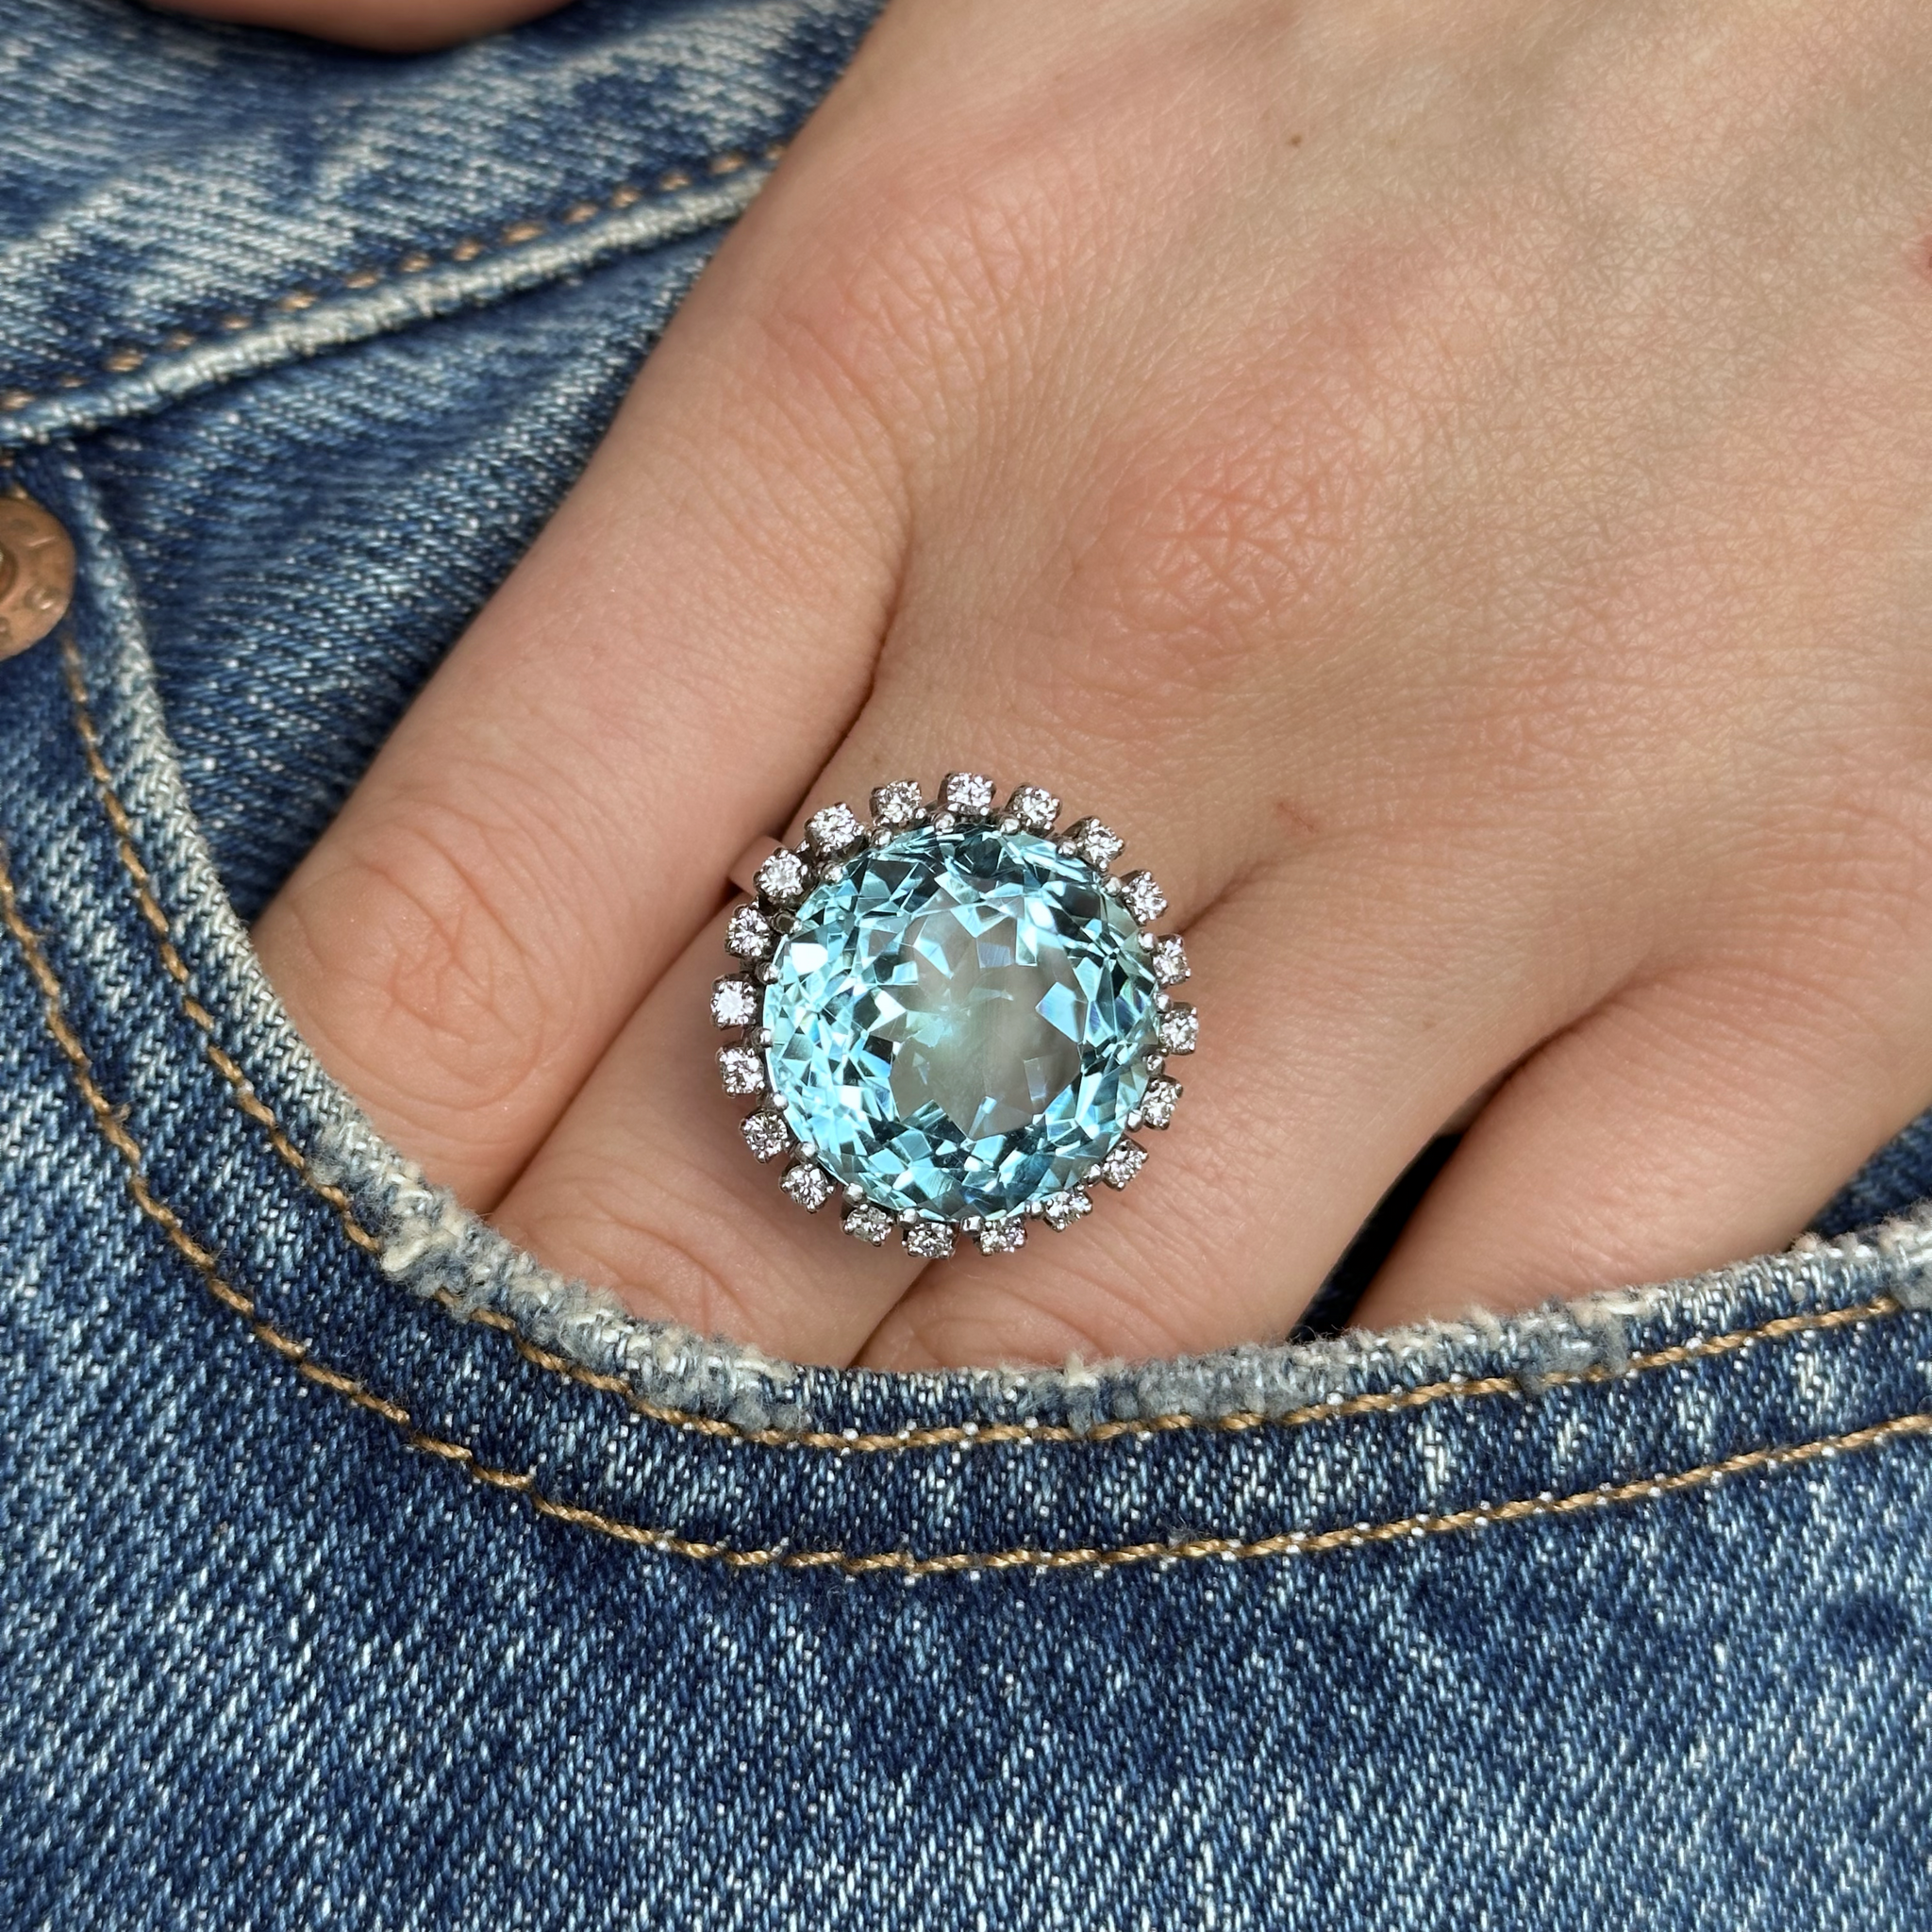 20ct Aquamarine and Diamond Cluster Ring, 18ct White Gold, Circa 1970 worn on hand in pocket of jeans